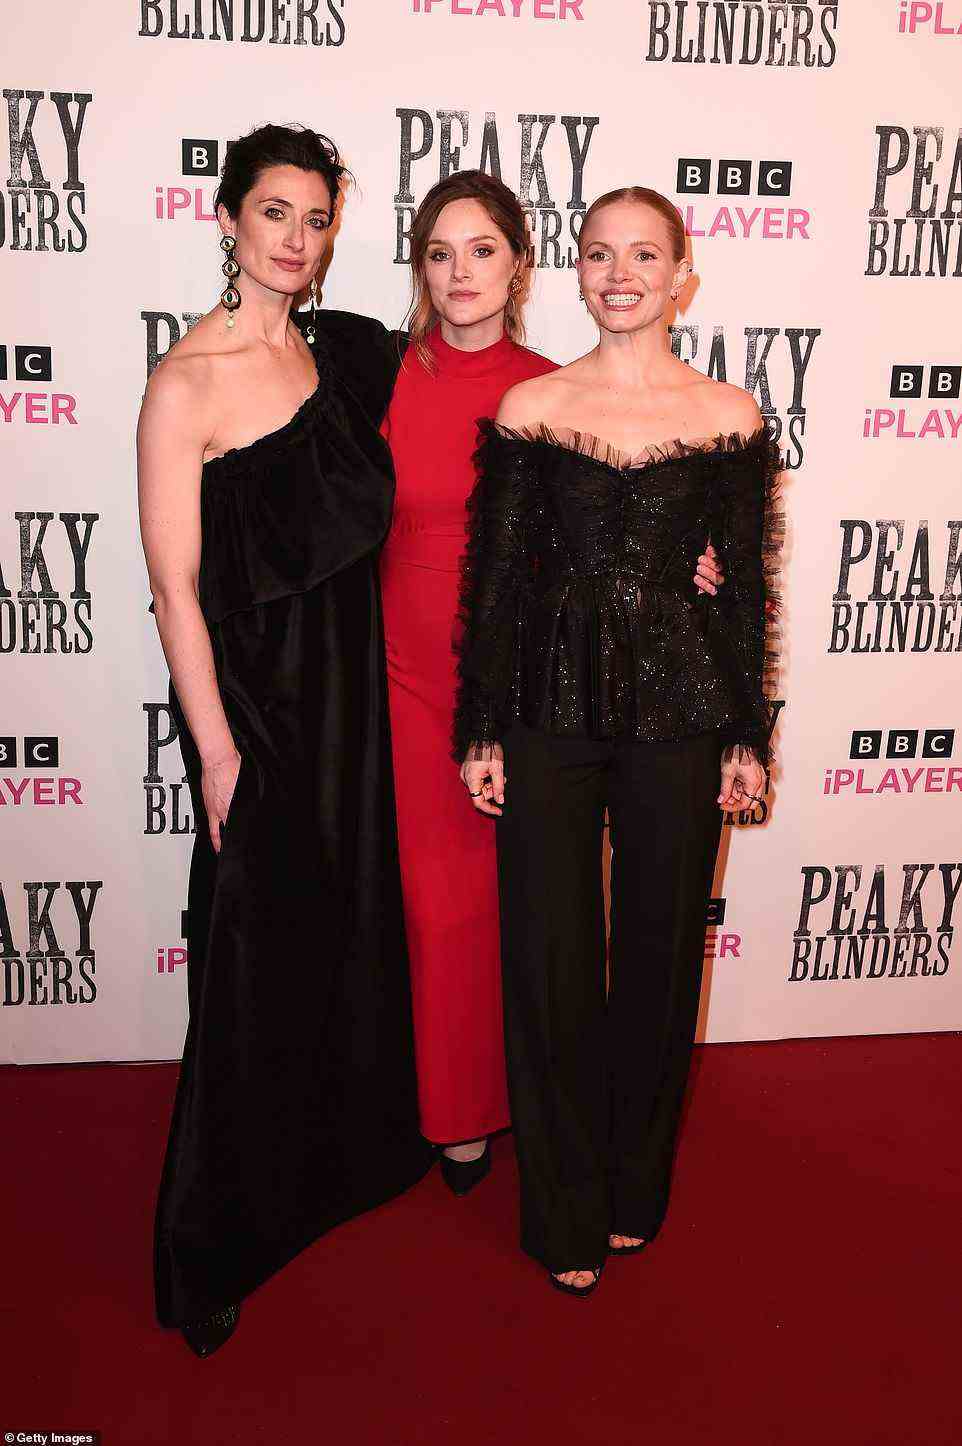 Leading ladies: The actresses pulled out all the stops as they donned stylish ensembles while posing on the red carpet to celebrate the final season of the period crime drama